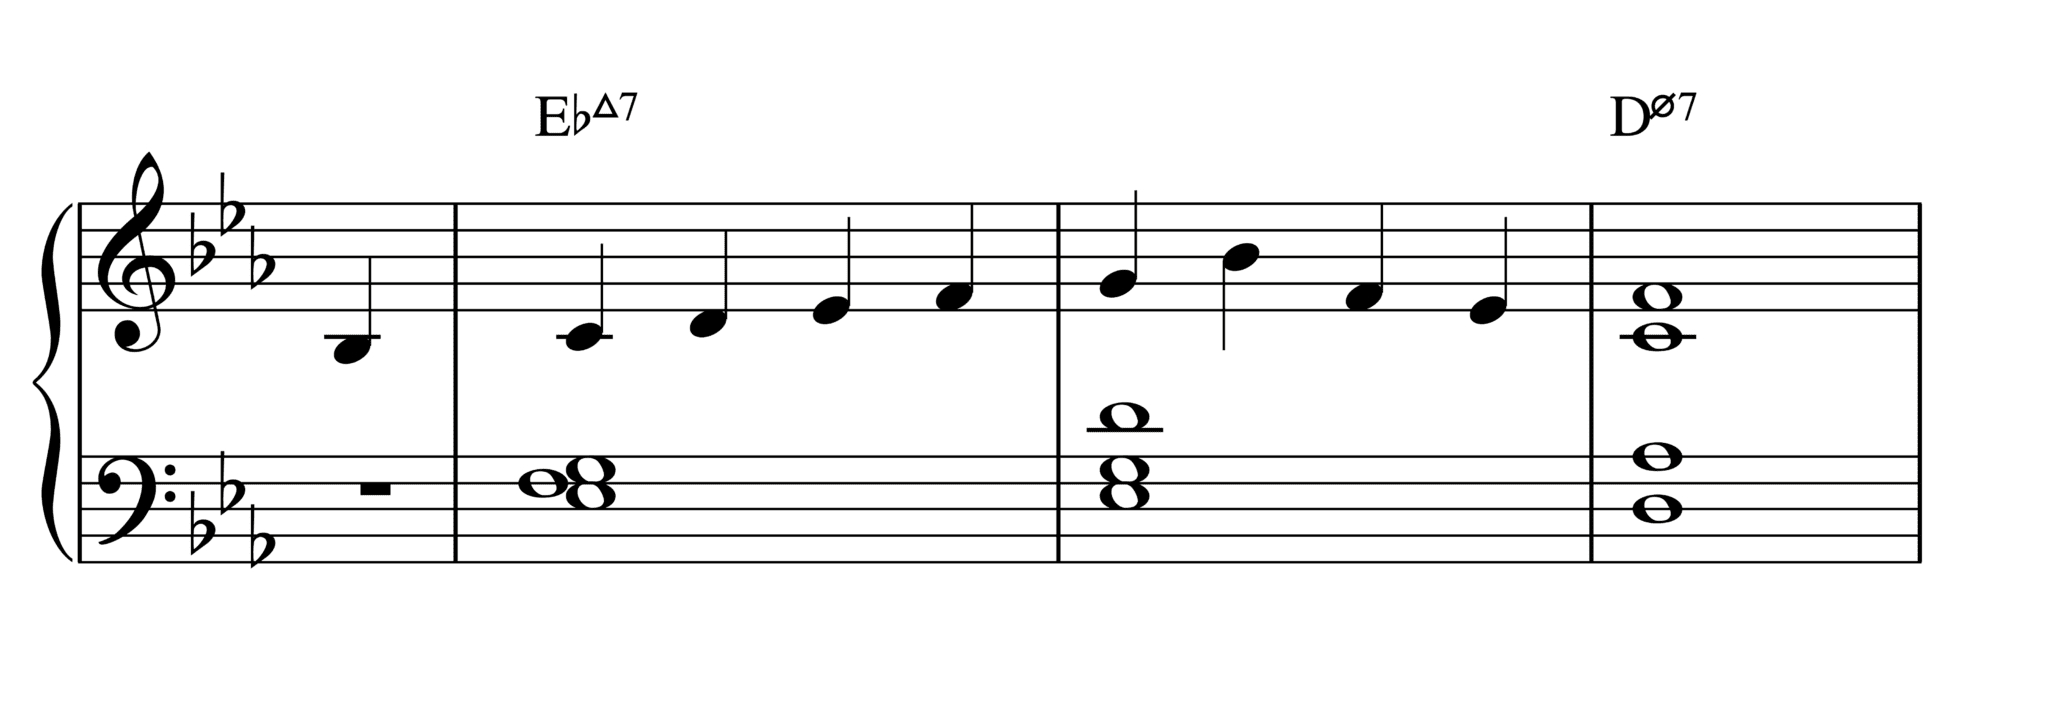 Set A Fire Chords Easy Reharmonization Keep The Root Change The Chord Quality You